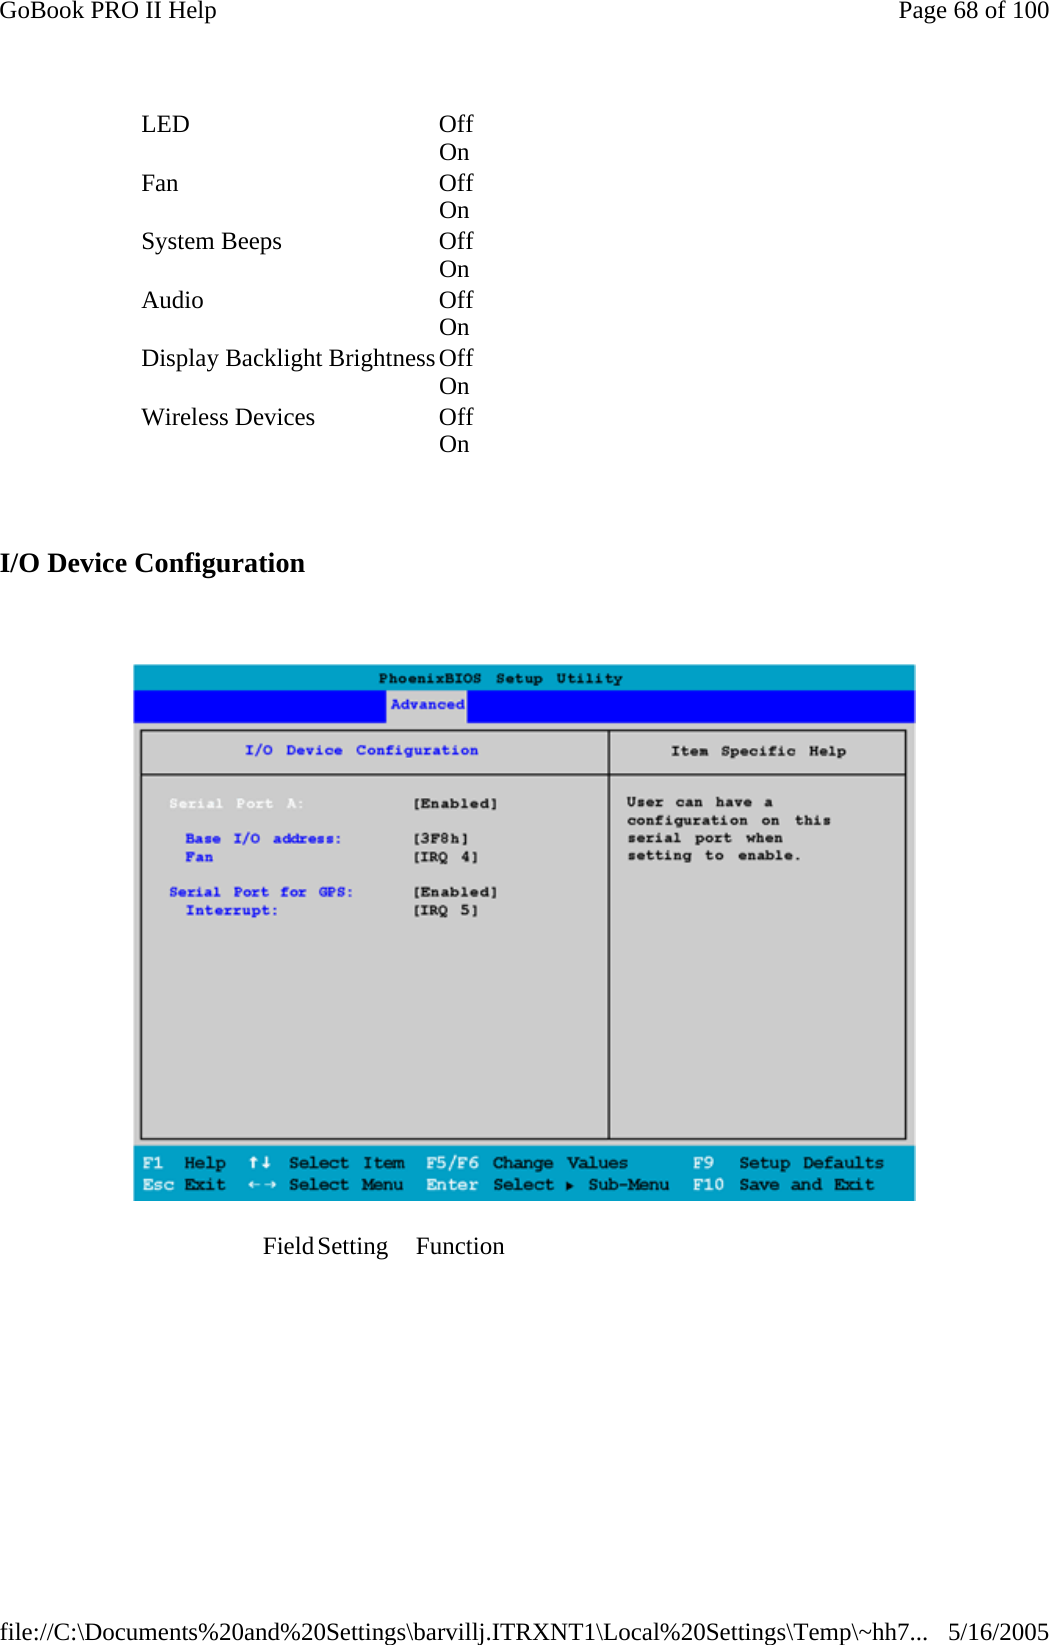   I/O Device Configuration    LED Off On    Fan Off On    System Beeps  Off On    Audio Off On    Display Backlight BrightnessOff On    Wireless Devices  Off On    Field Setting  Function                                                 Page 68 of 100GoBook PRO II Help5/16/2005file://C:\Documents%20and%20Settings\barvillj.ITRXNT1\Local%20Settings\Temp\~hh7...